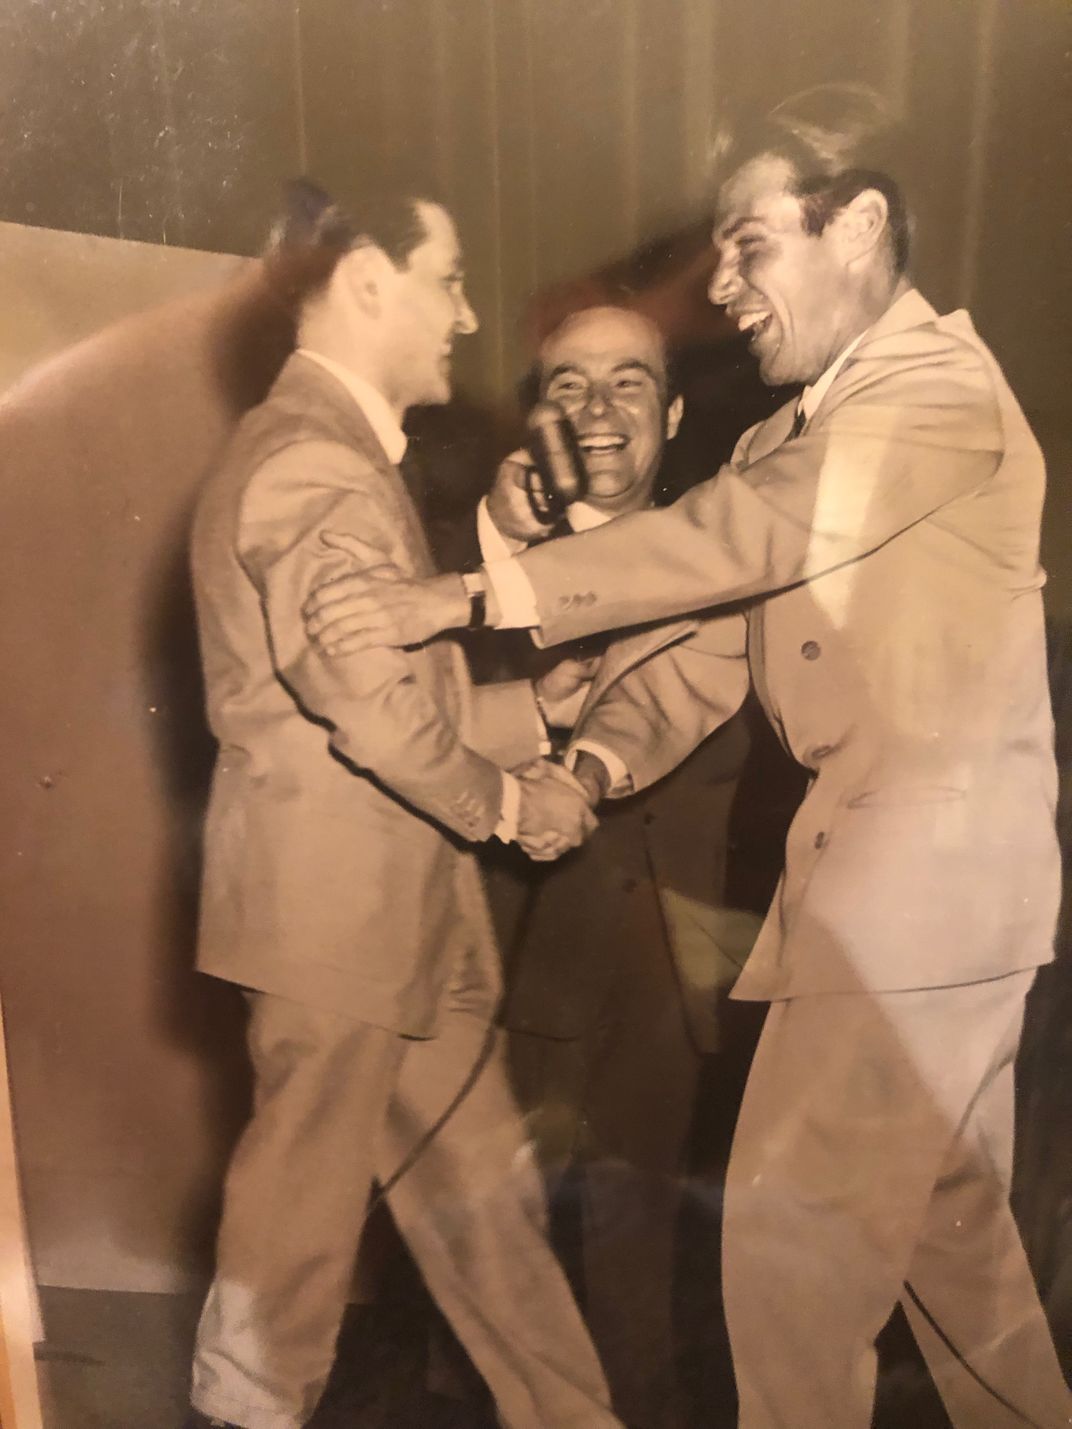 Simon (left) and Ortiz reunite for the first time since World War II on the set of NBC radio show "This Is Your Life" in November 1949.